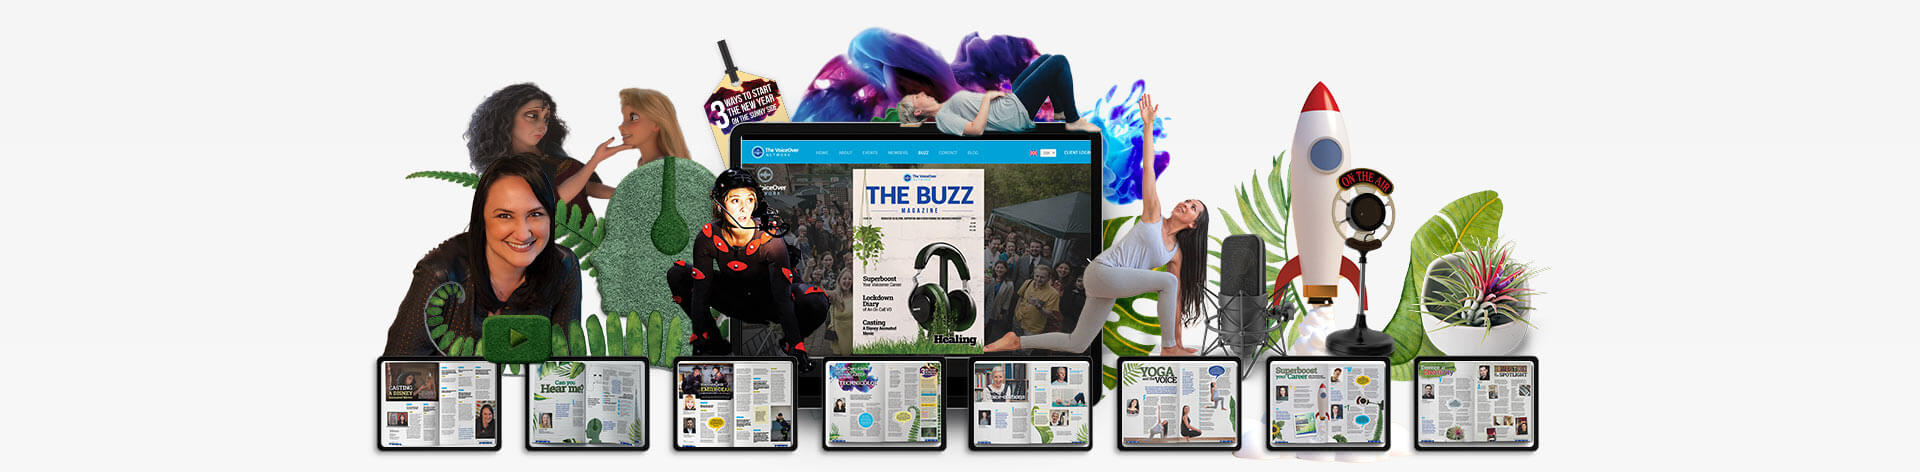 The VoiceOver Network The Buzz Magazine Interactive English Banner